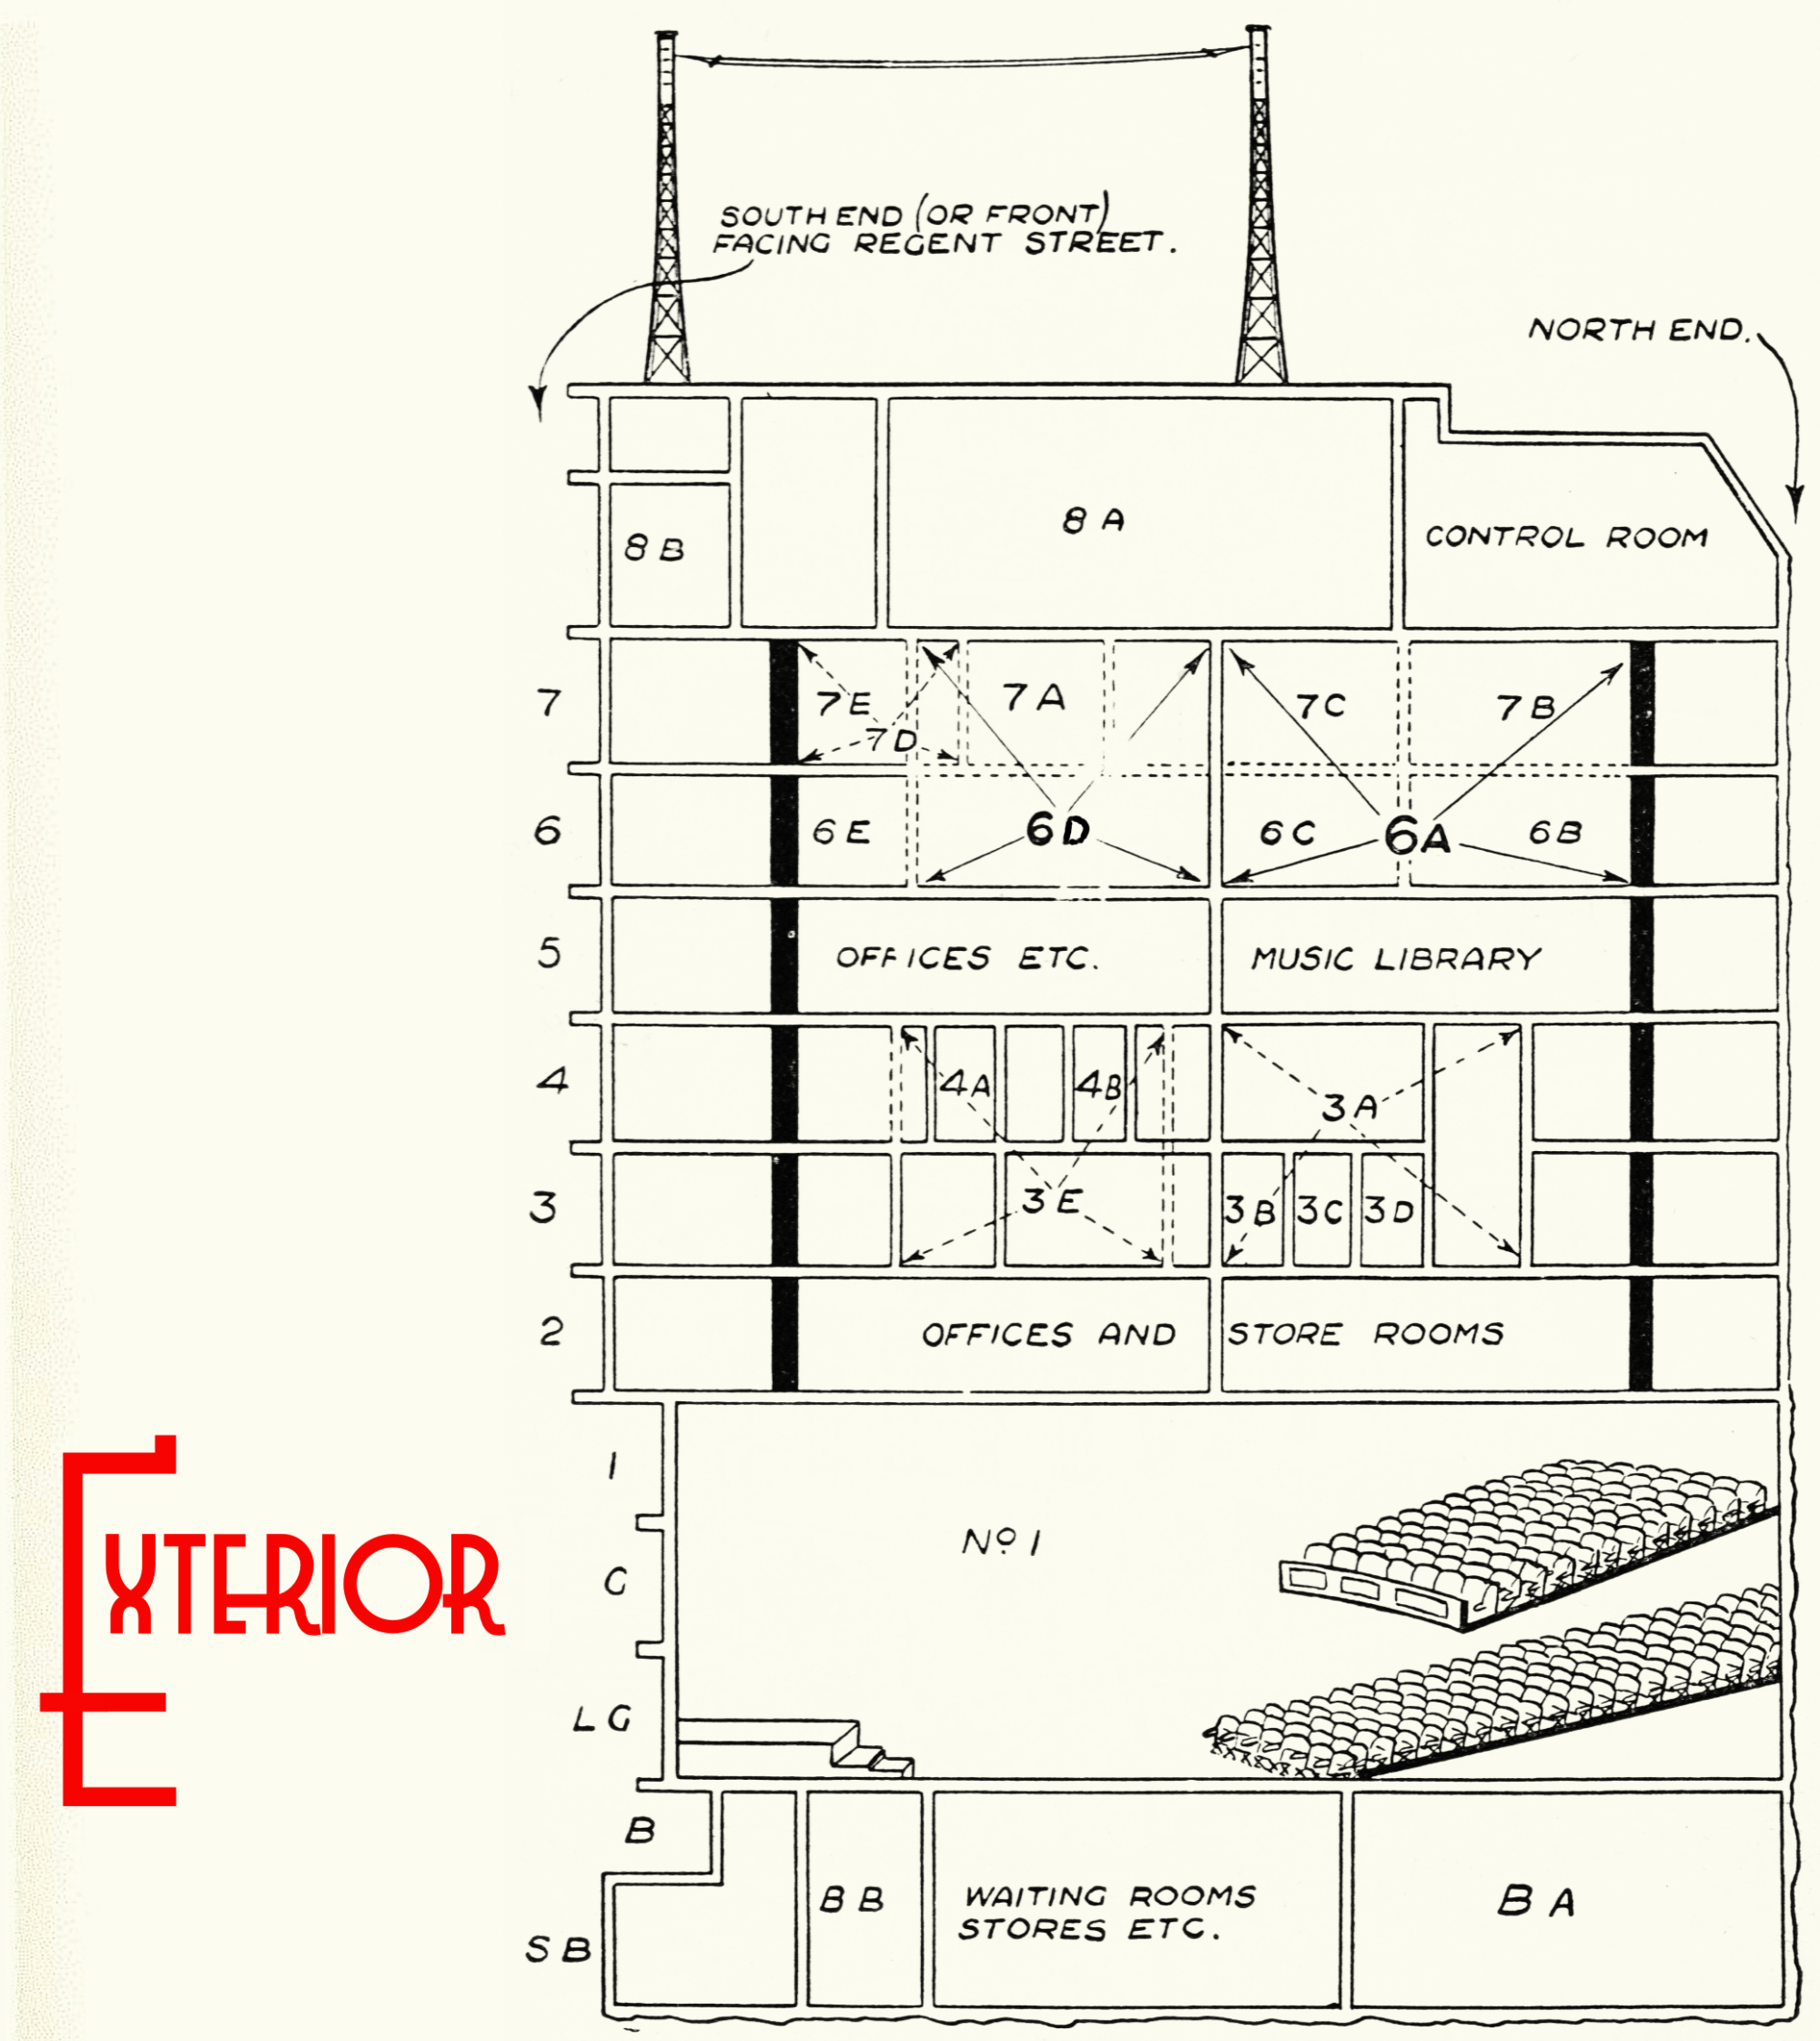 Cutaway plan of the building